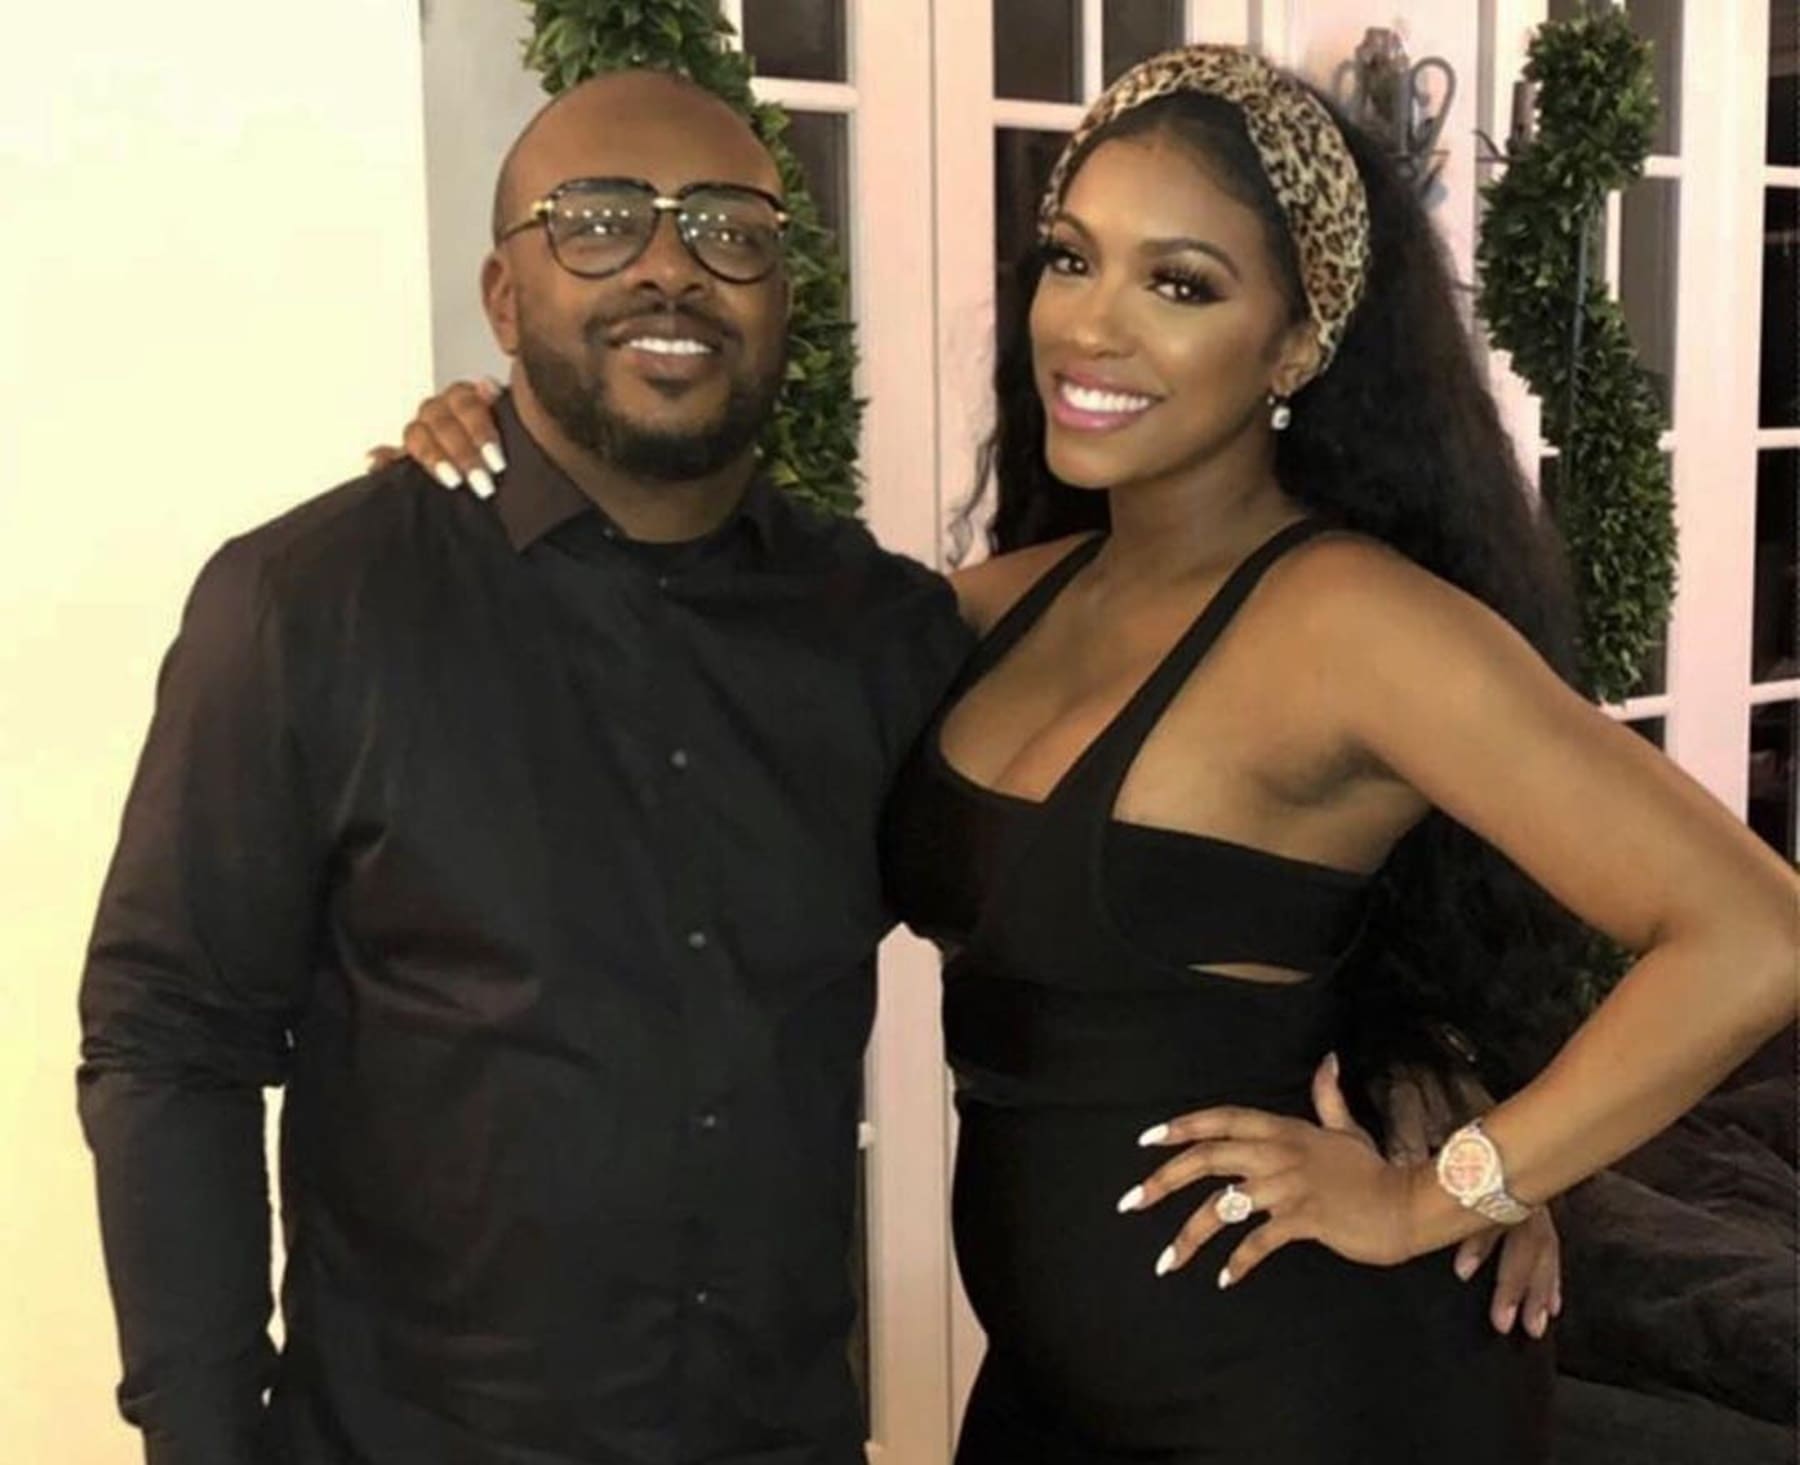 Porsha Williams And Dennis McKinley Celebrate Their First Easter Together With Baby Pilar Jhena - See The Family In White, Sending Love To Everyone